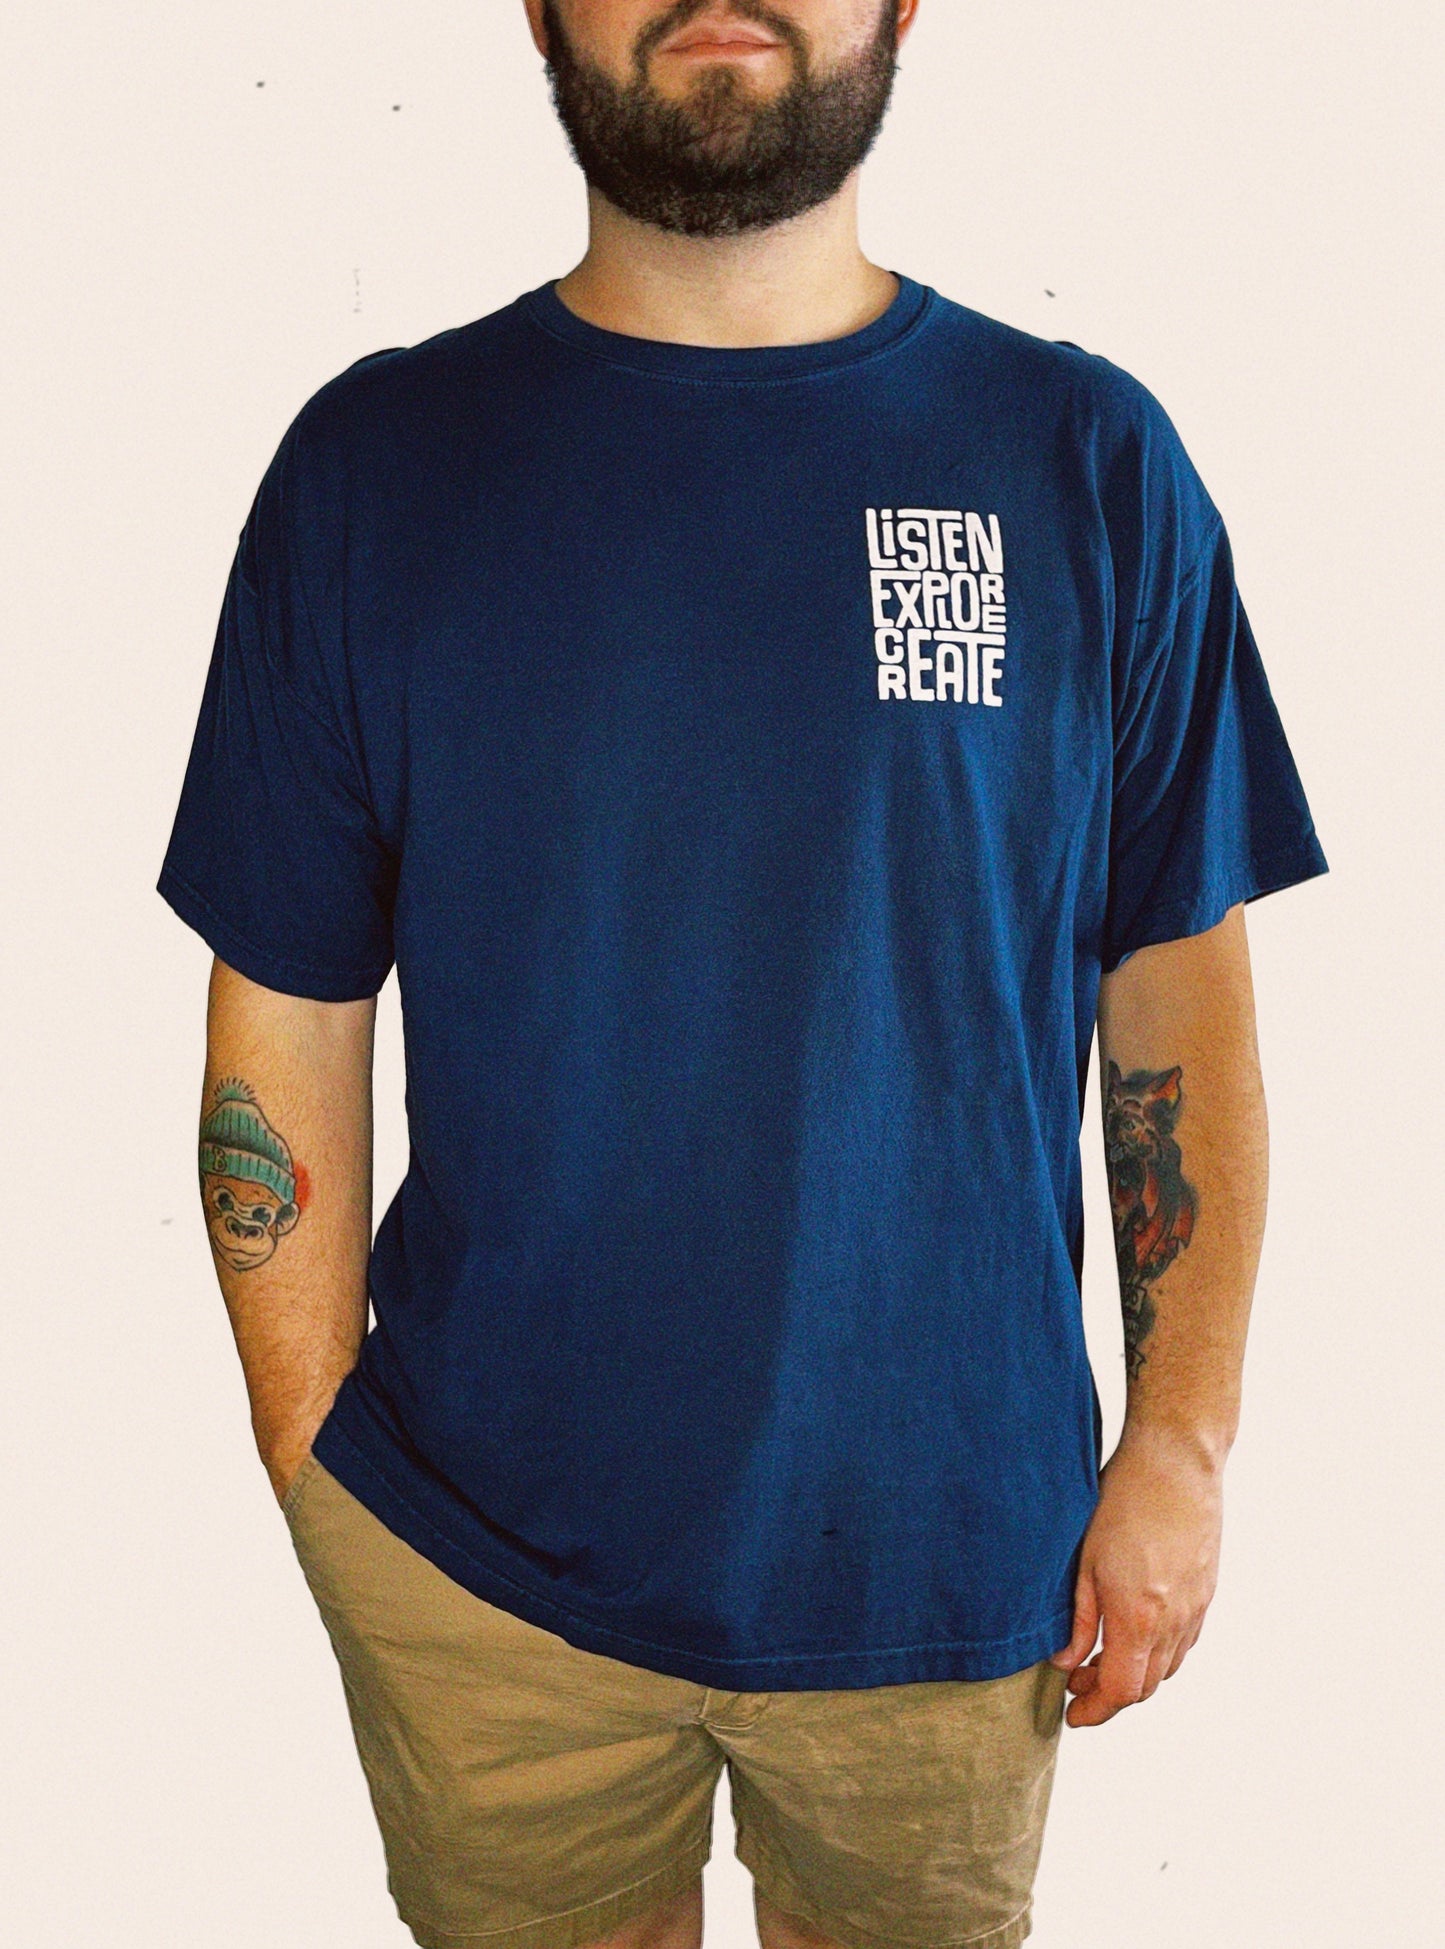 Navy Comfort Colors tee embellished with LiSTEN EXPLORE CREATE